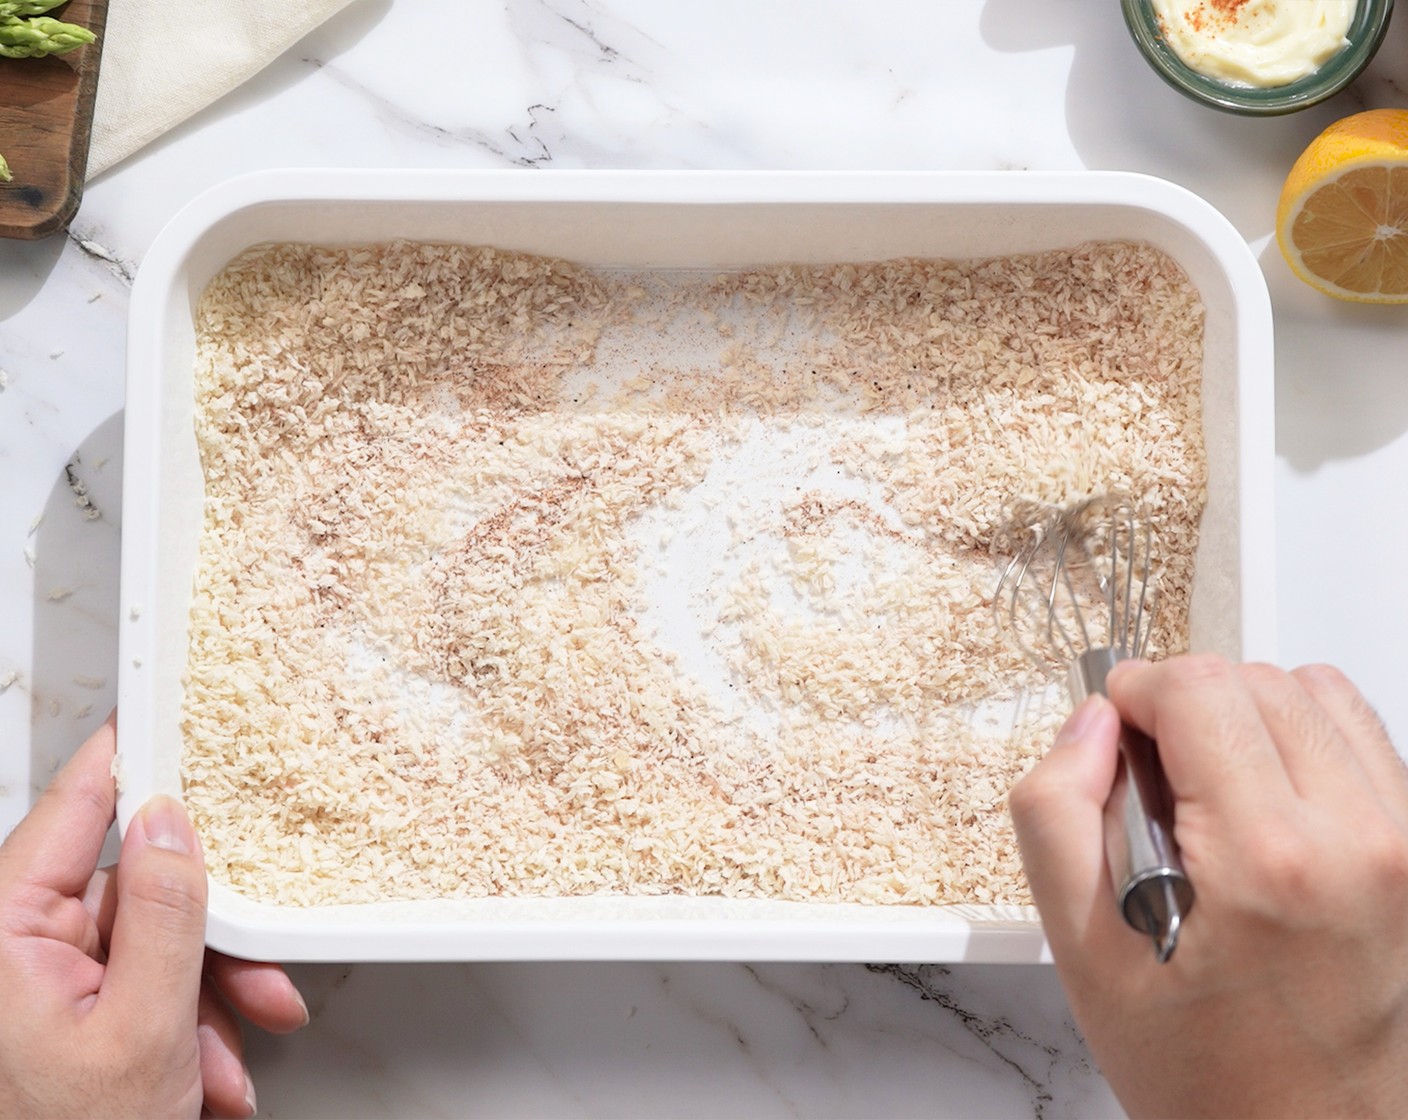 step 2 In a tray, mix together Breadcrumbs (1 cup), McCormick® Garlic Powder (1/2 tsp), Paprika (1/2 tsp), Salt (1/2 tsp), and Ground Black Pepper (1/4 tsp).